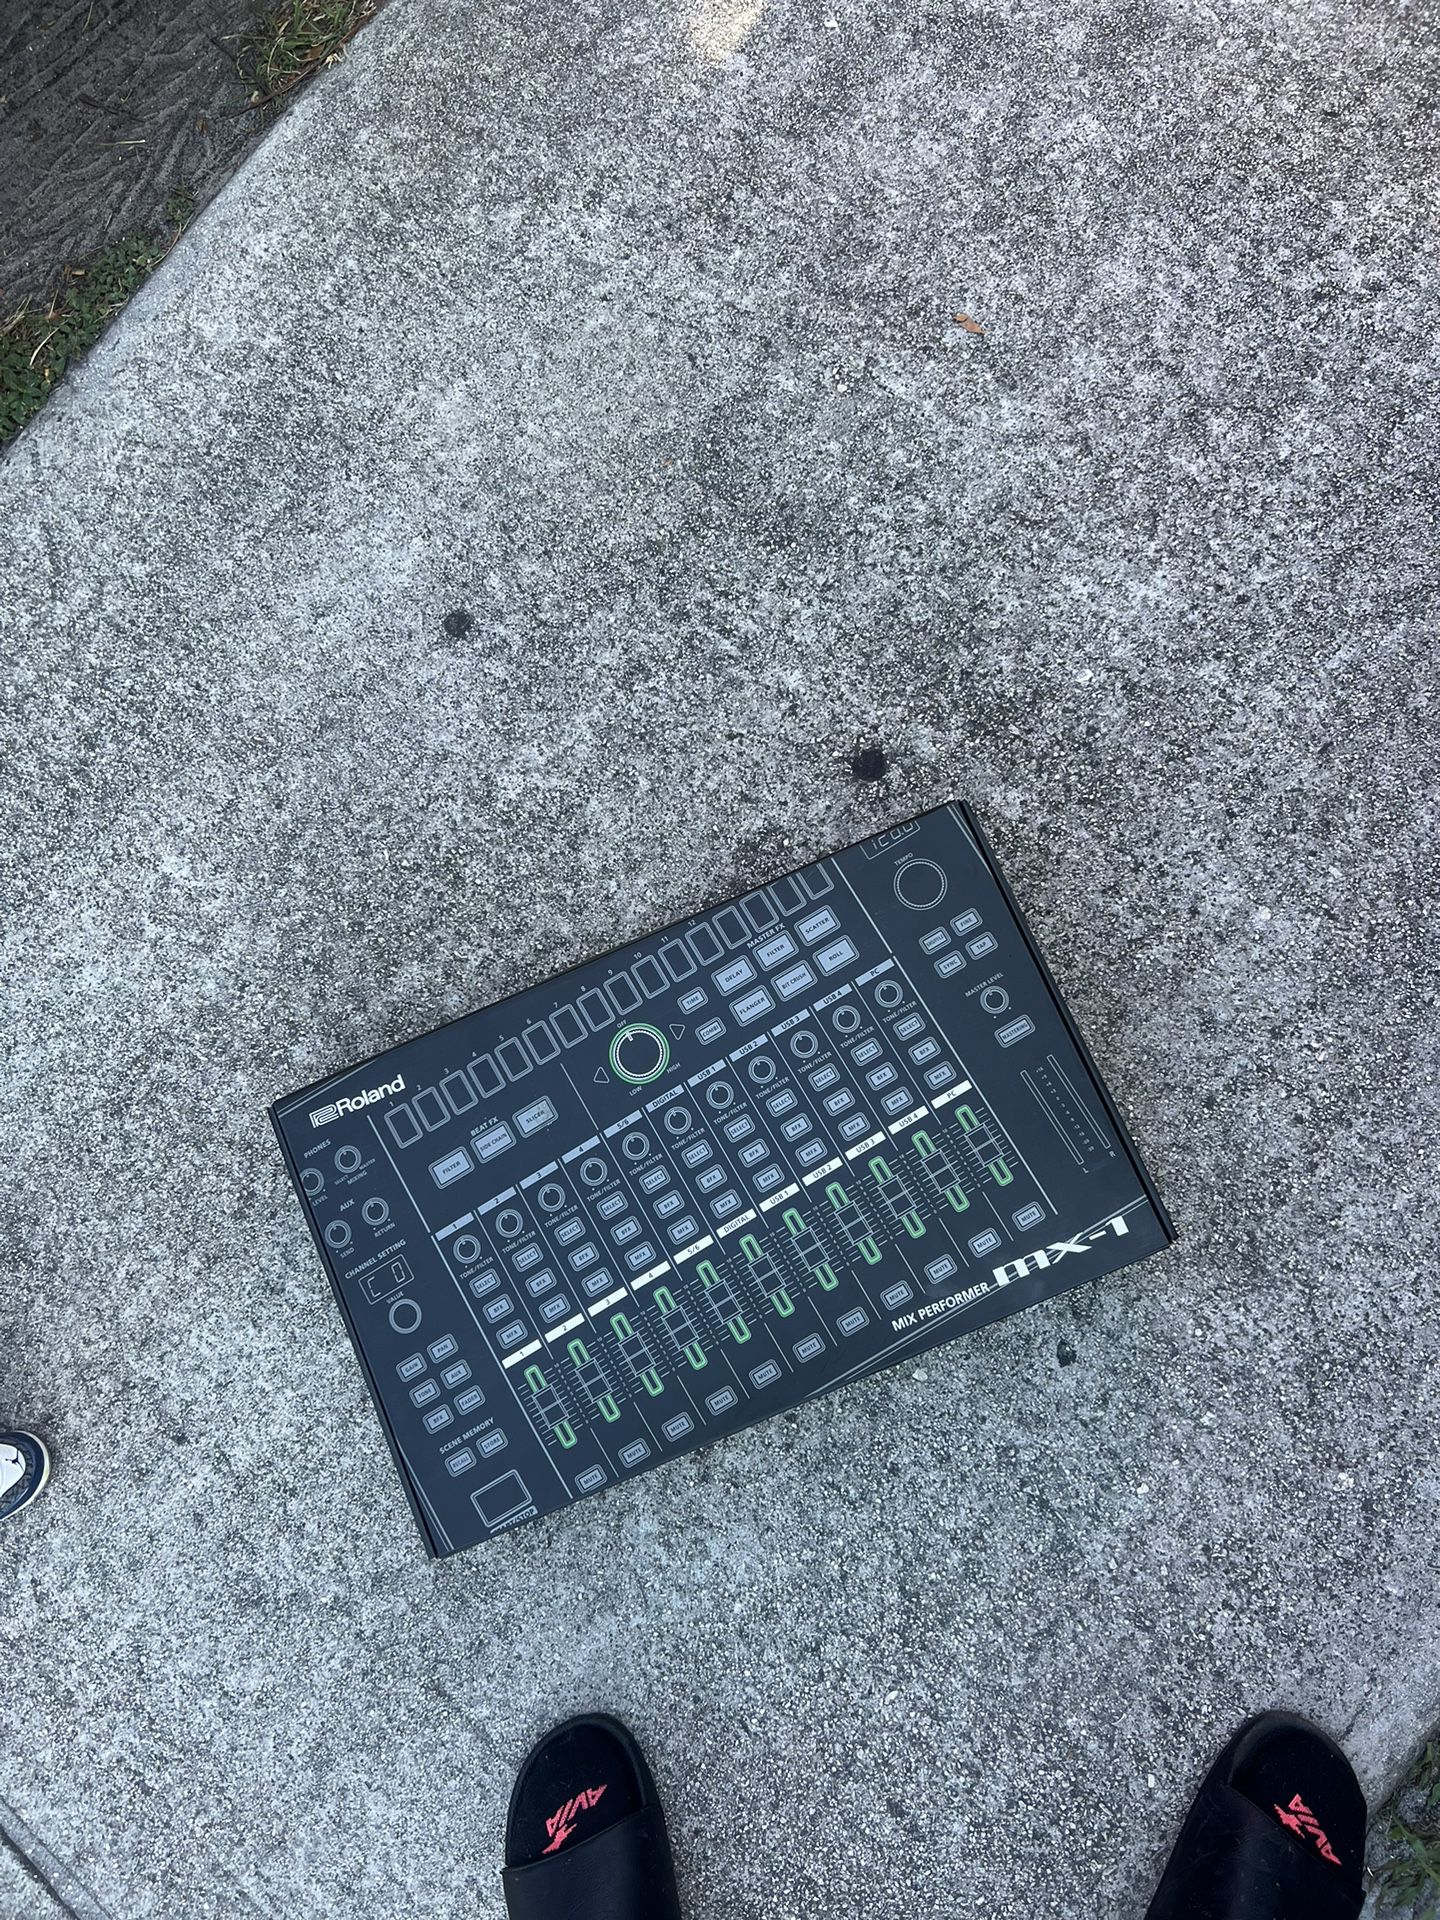 ROLAND MX-1 MIXING BOARD